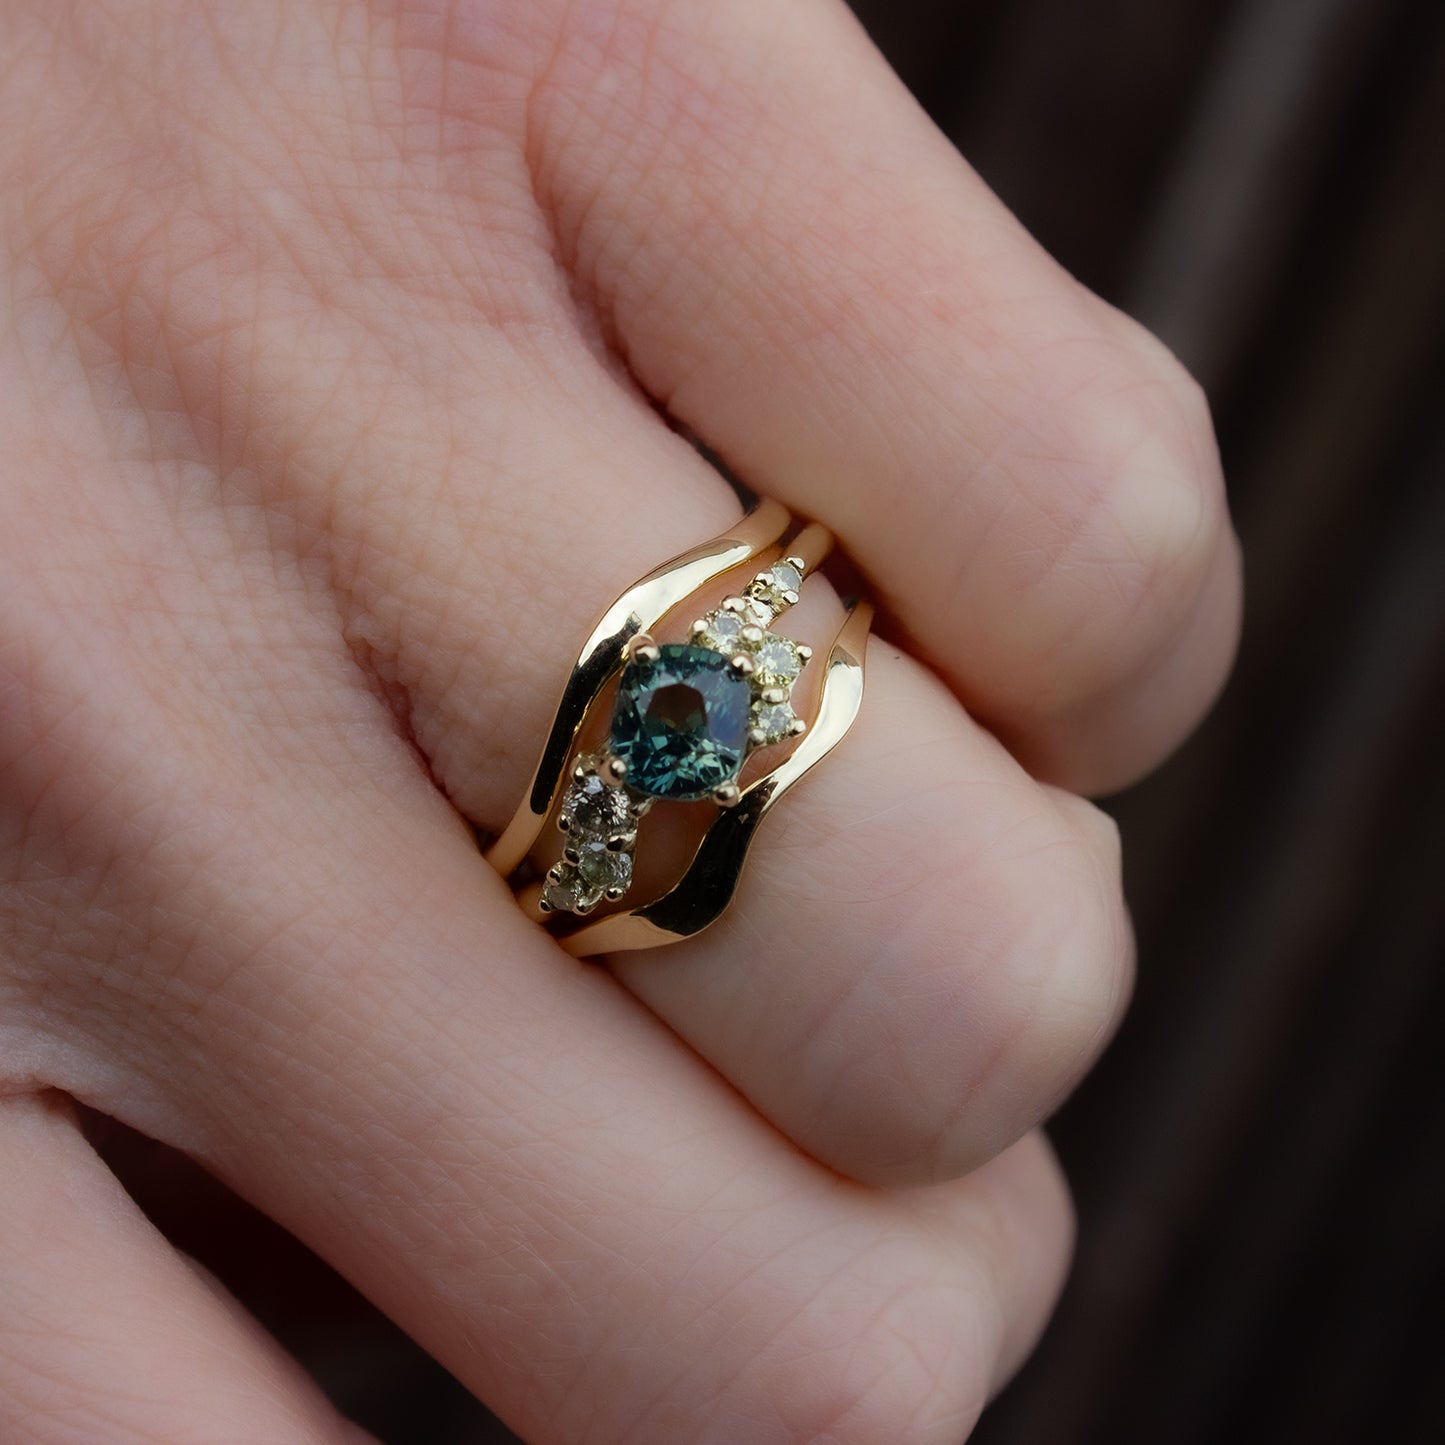 Beautiful and delicate alternative engagement ring featuring cushion cut teal green Montana sapphire flanked by yellow diamonds gently scattered along the band. Resembling first flower buds this ring was inspired by. Showcased with a perfectly curved wedding band, designed to gently hug the ring.